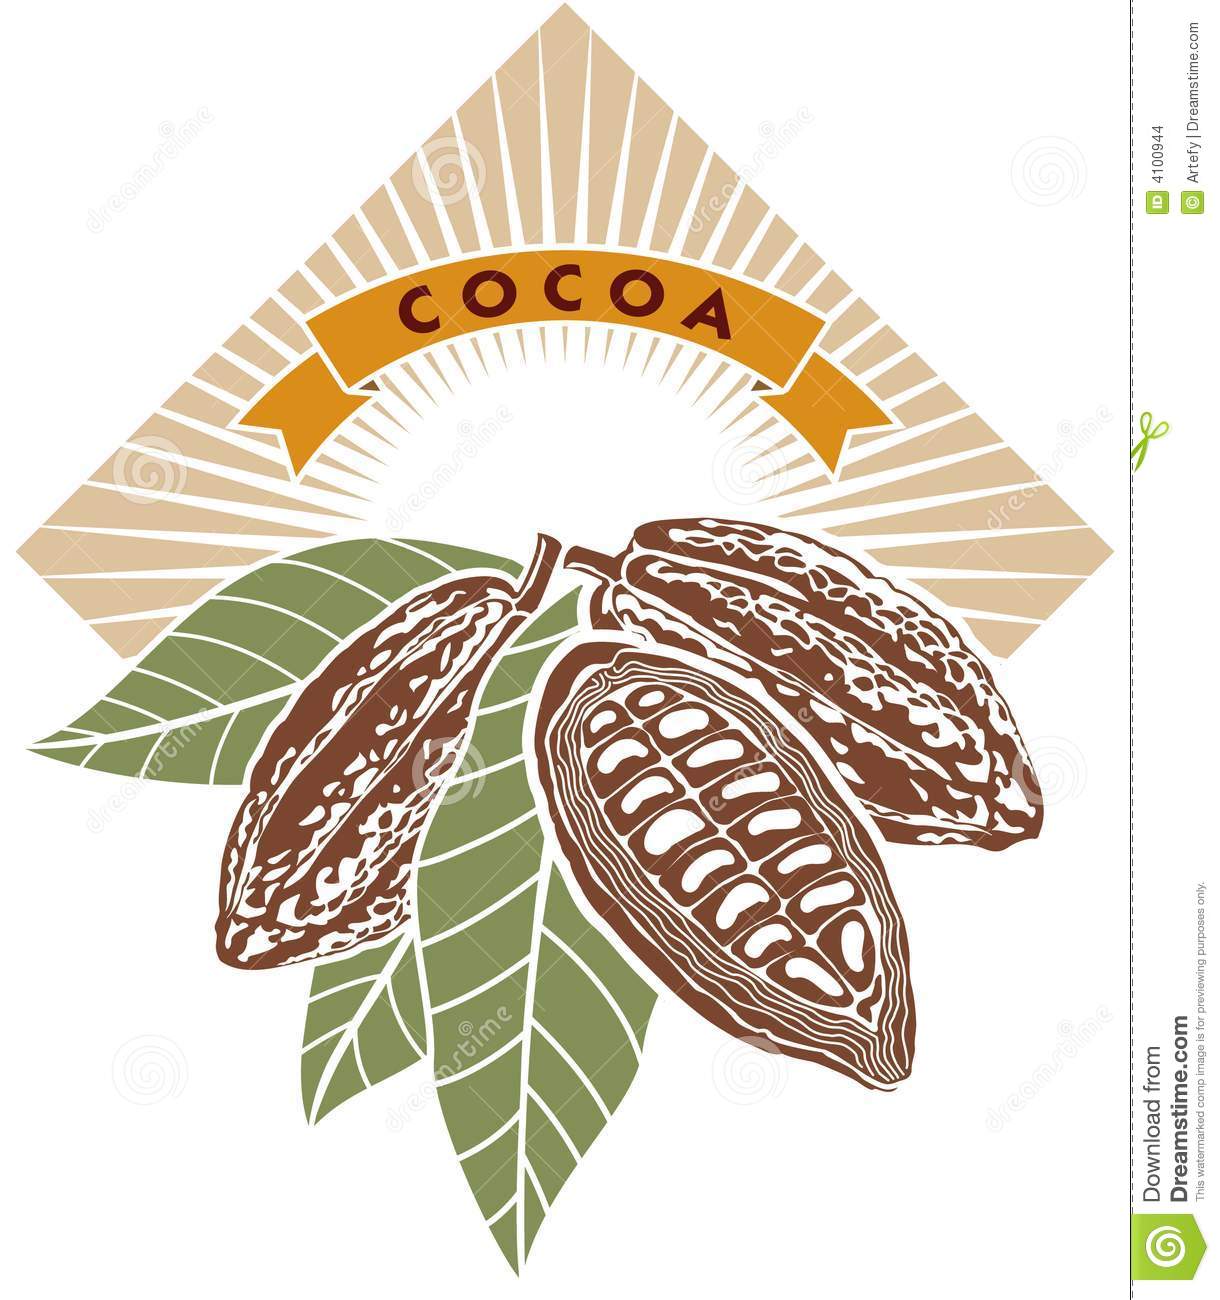 Cocoa Beans Stock Images   Image  4100944